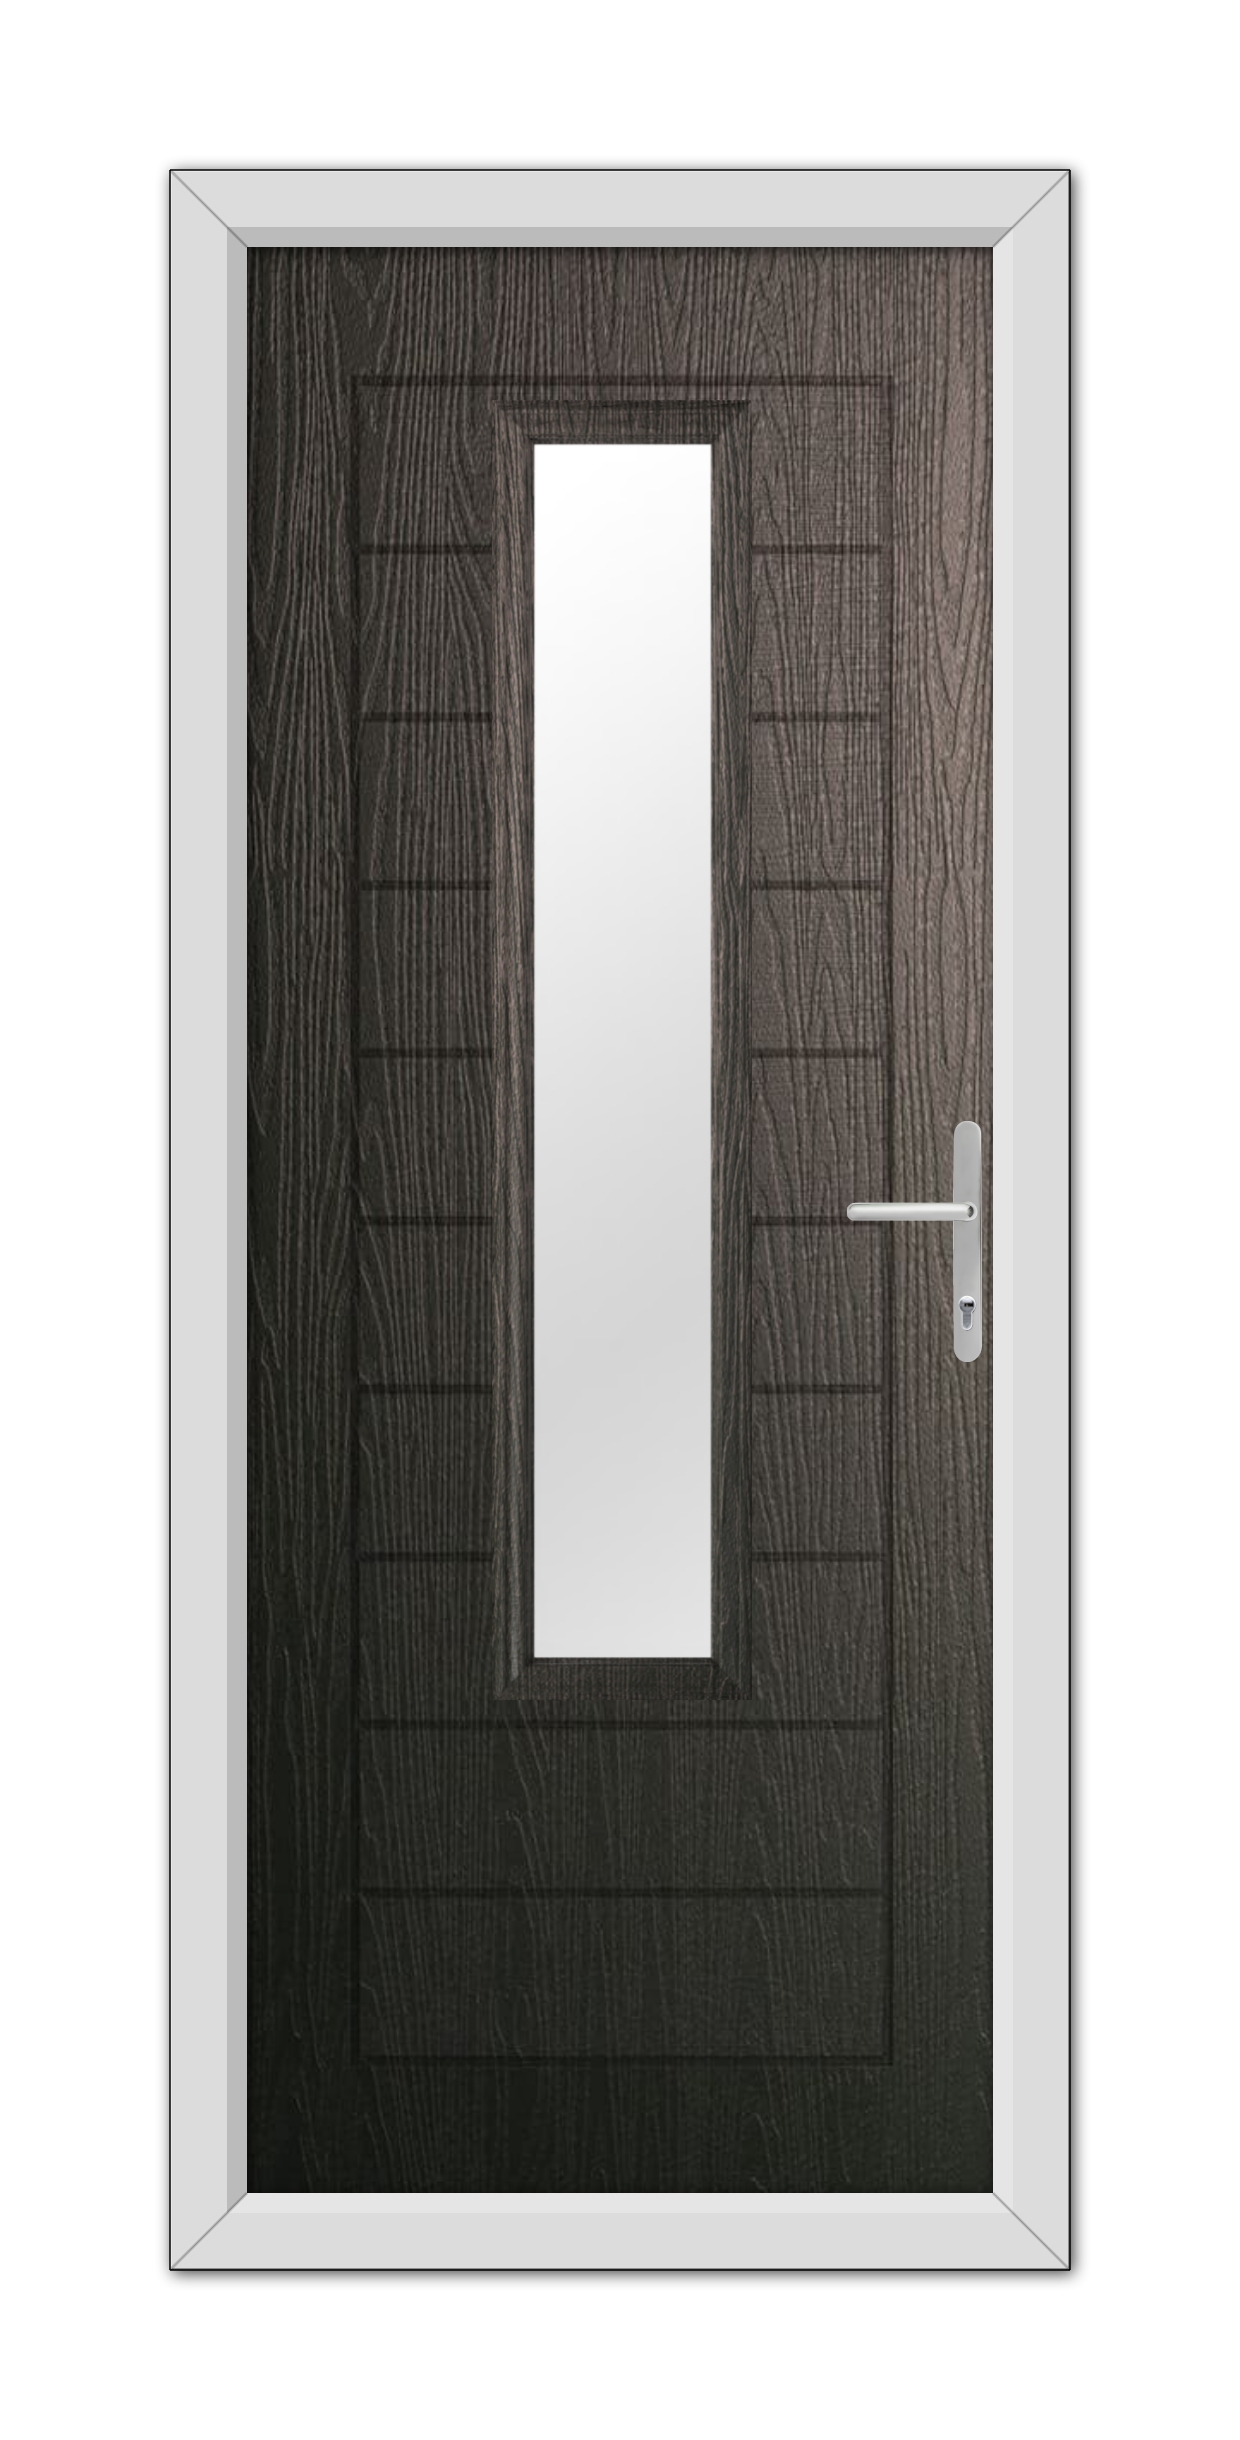 A modern Schwarzbraun Bedford Composite Door 48mm Timber Core featuring a vertical rectangular glass panel, framed in white, with a metallic handle on the right side.